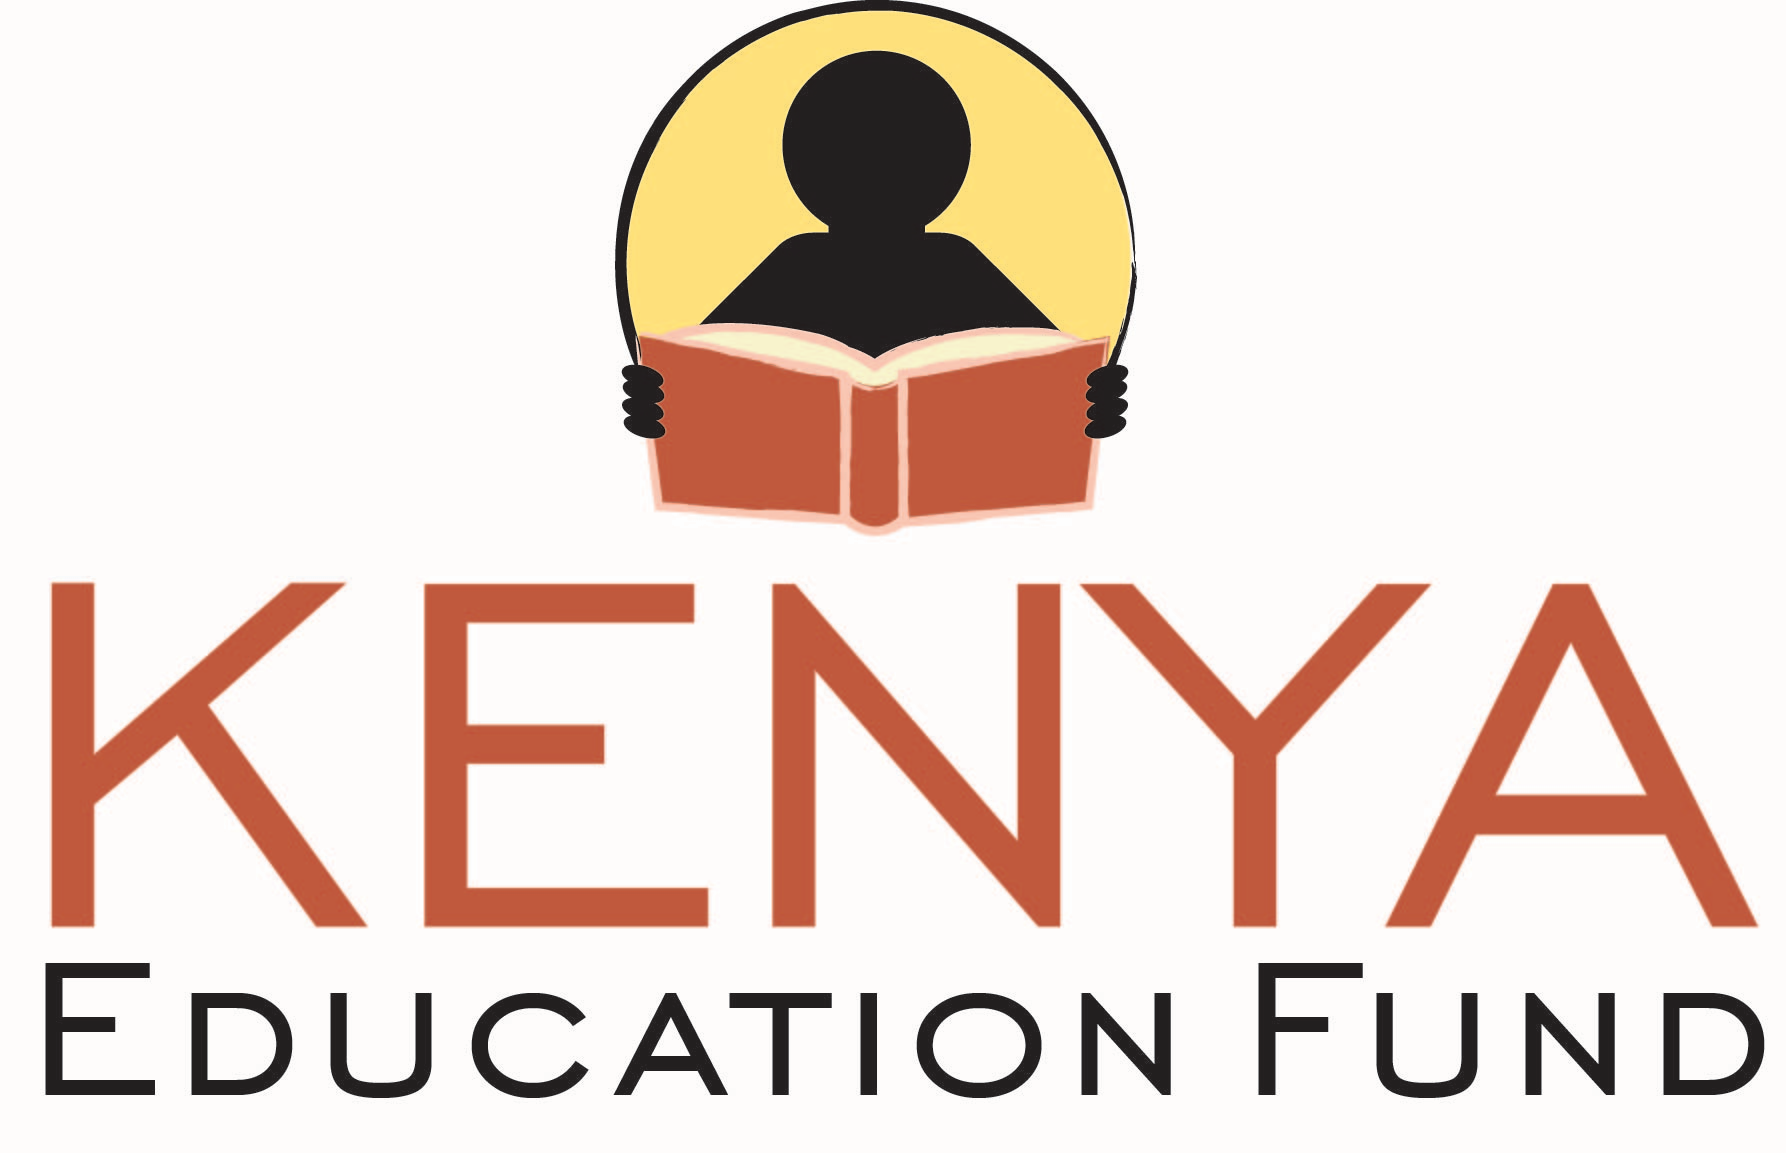 donors supporting education projects in kenya